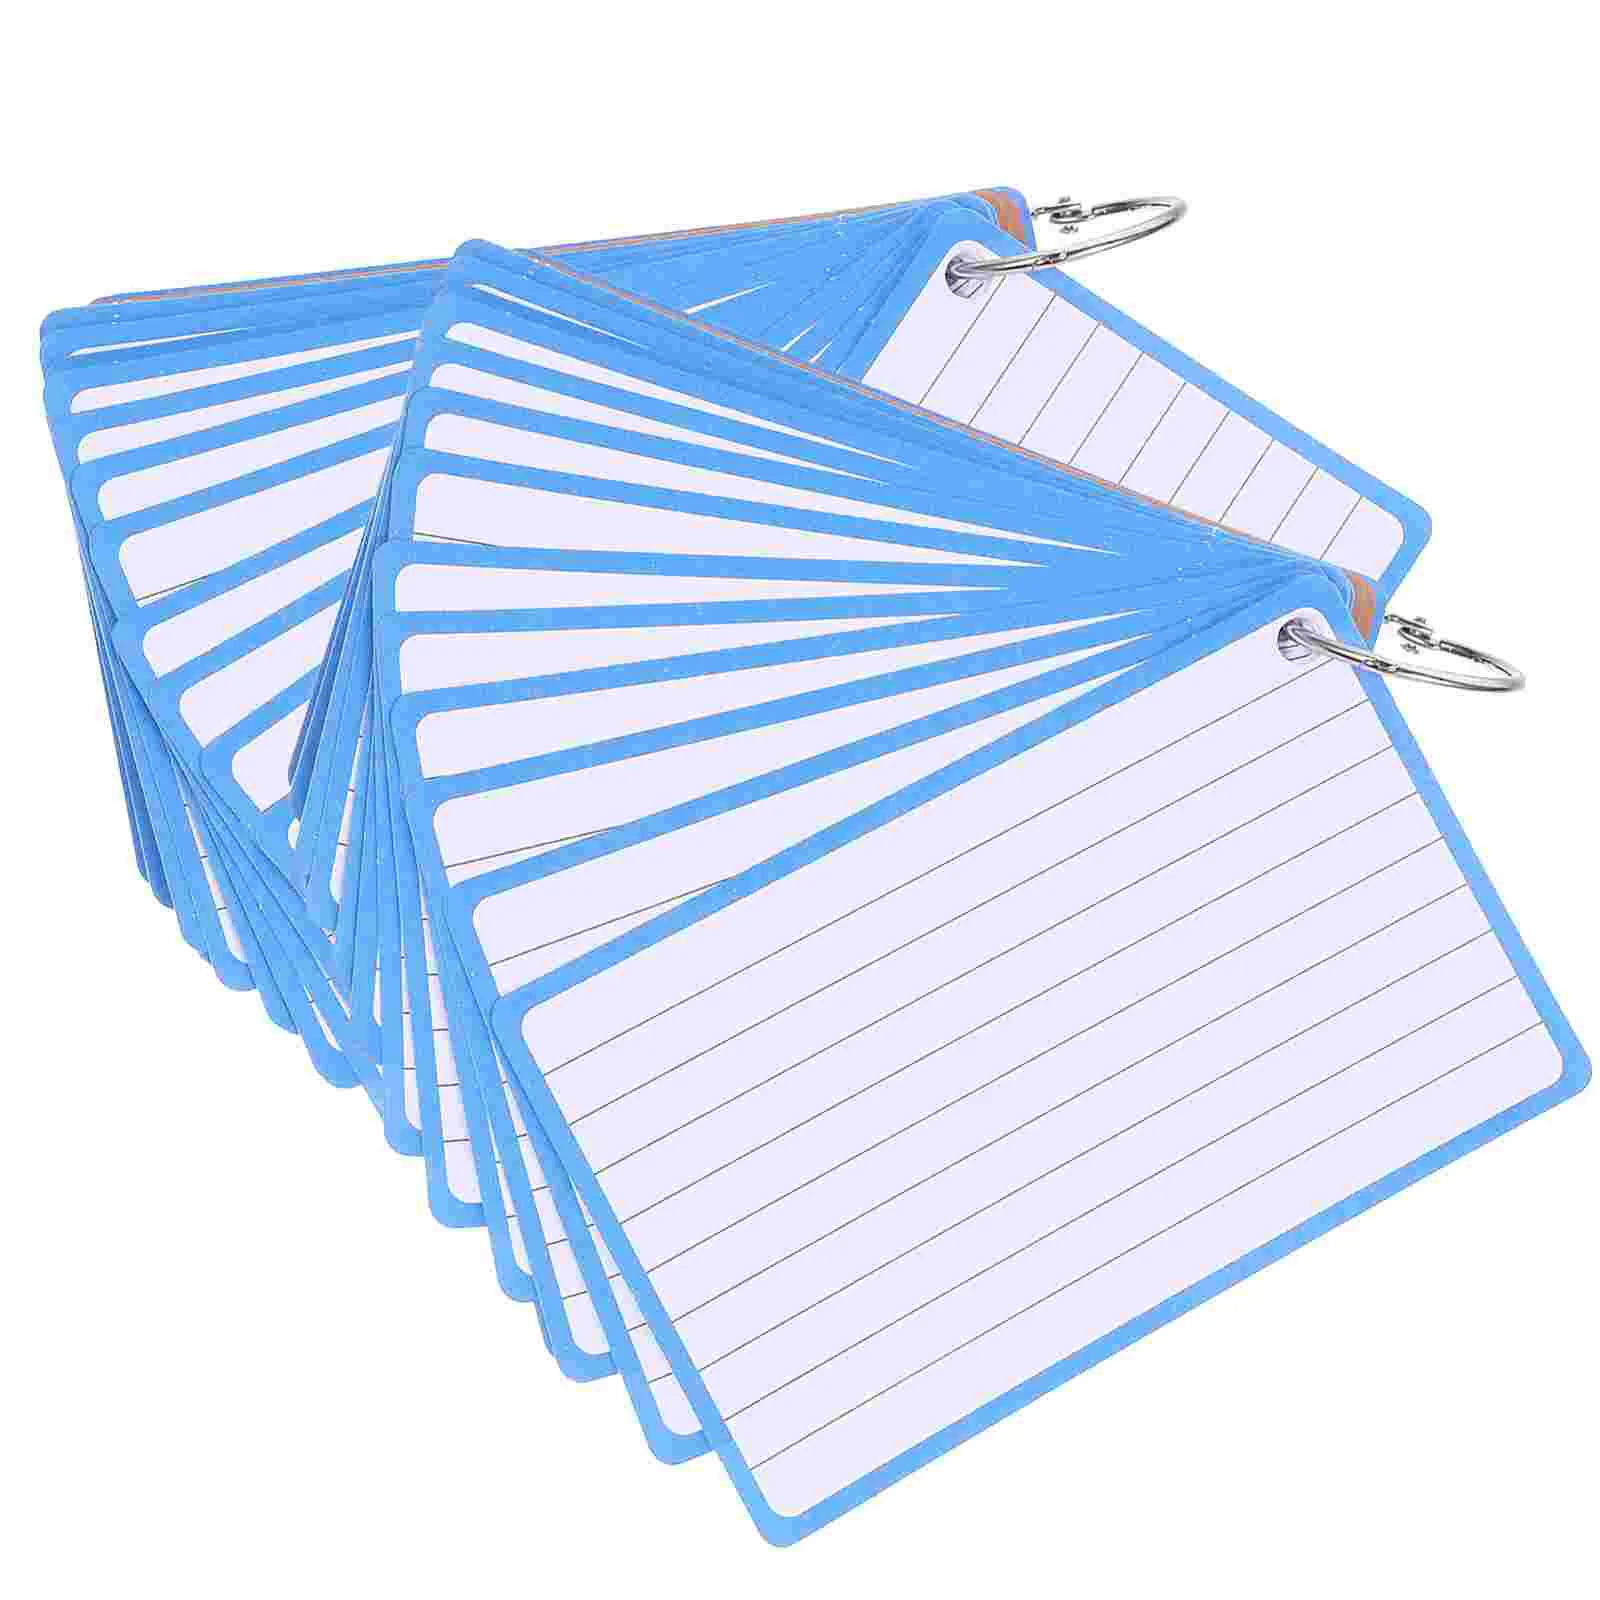 2 Books of Lined Flash Cards Colorful Flash Cards Blank Colored Card Index Cards for Office